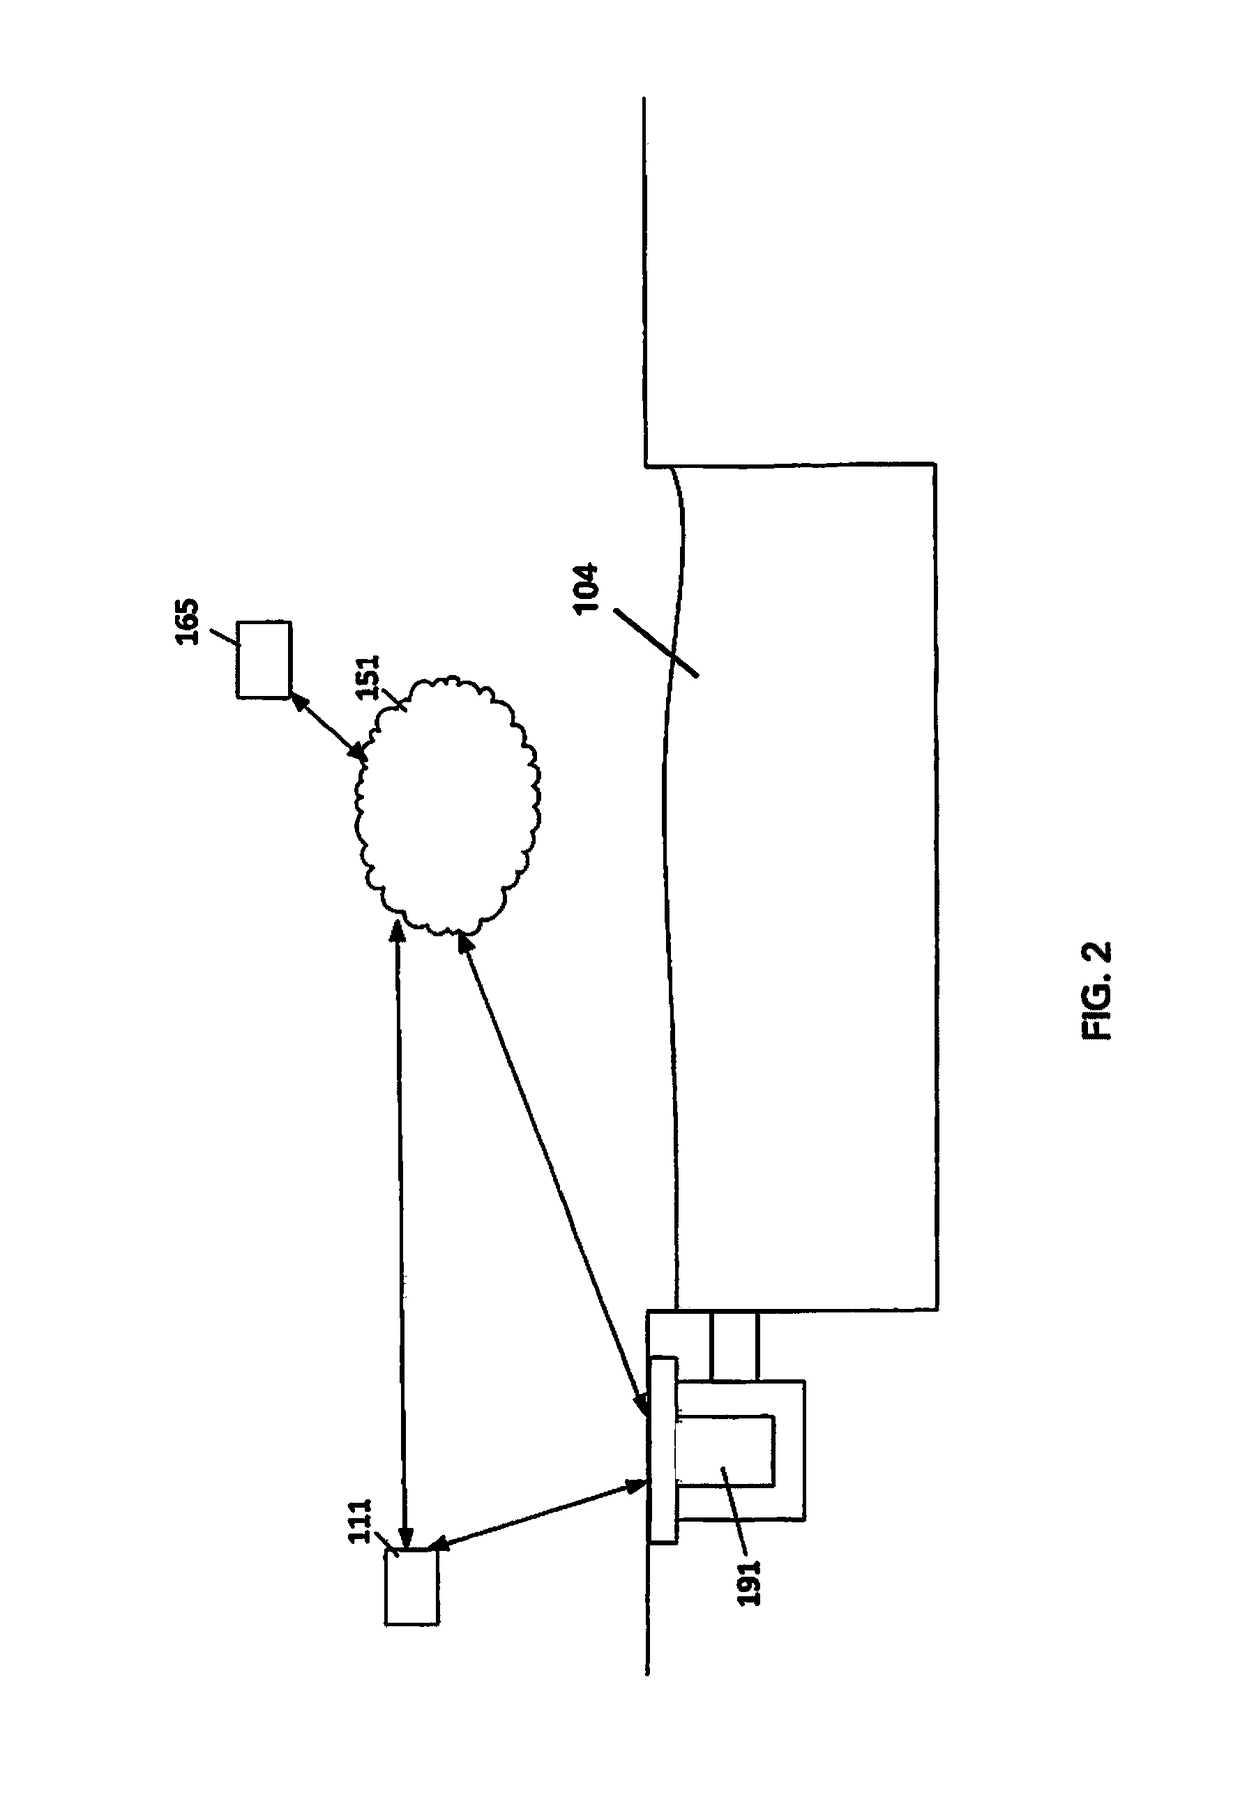 Water monitoring device and method